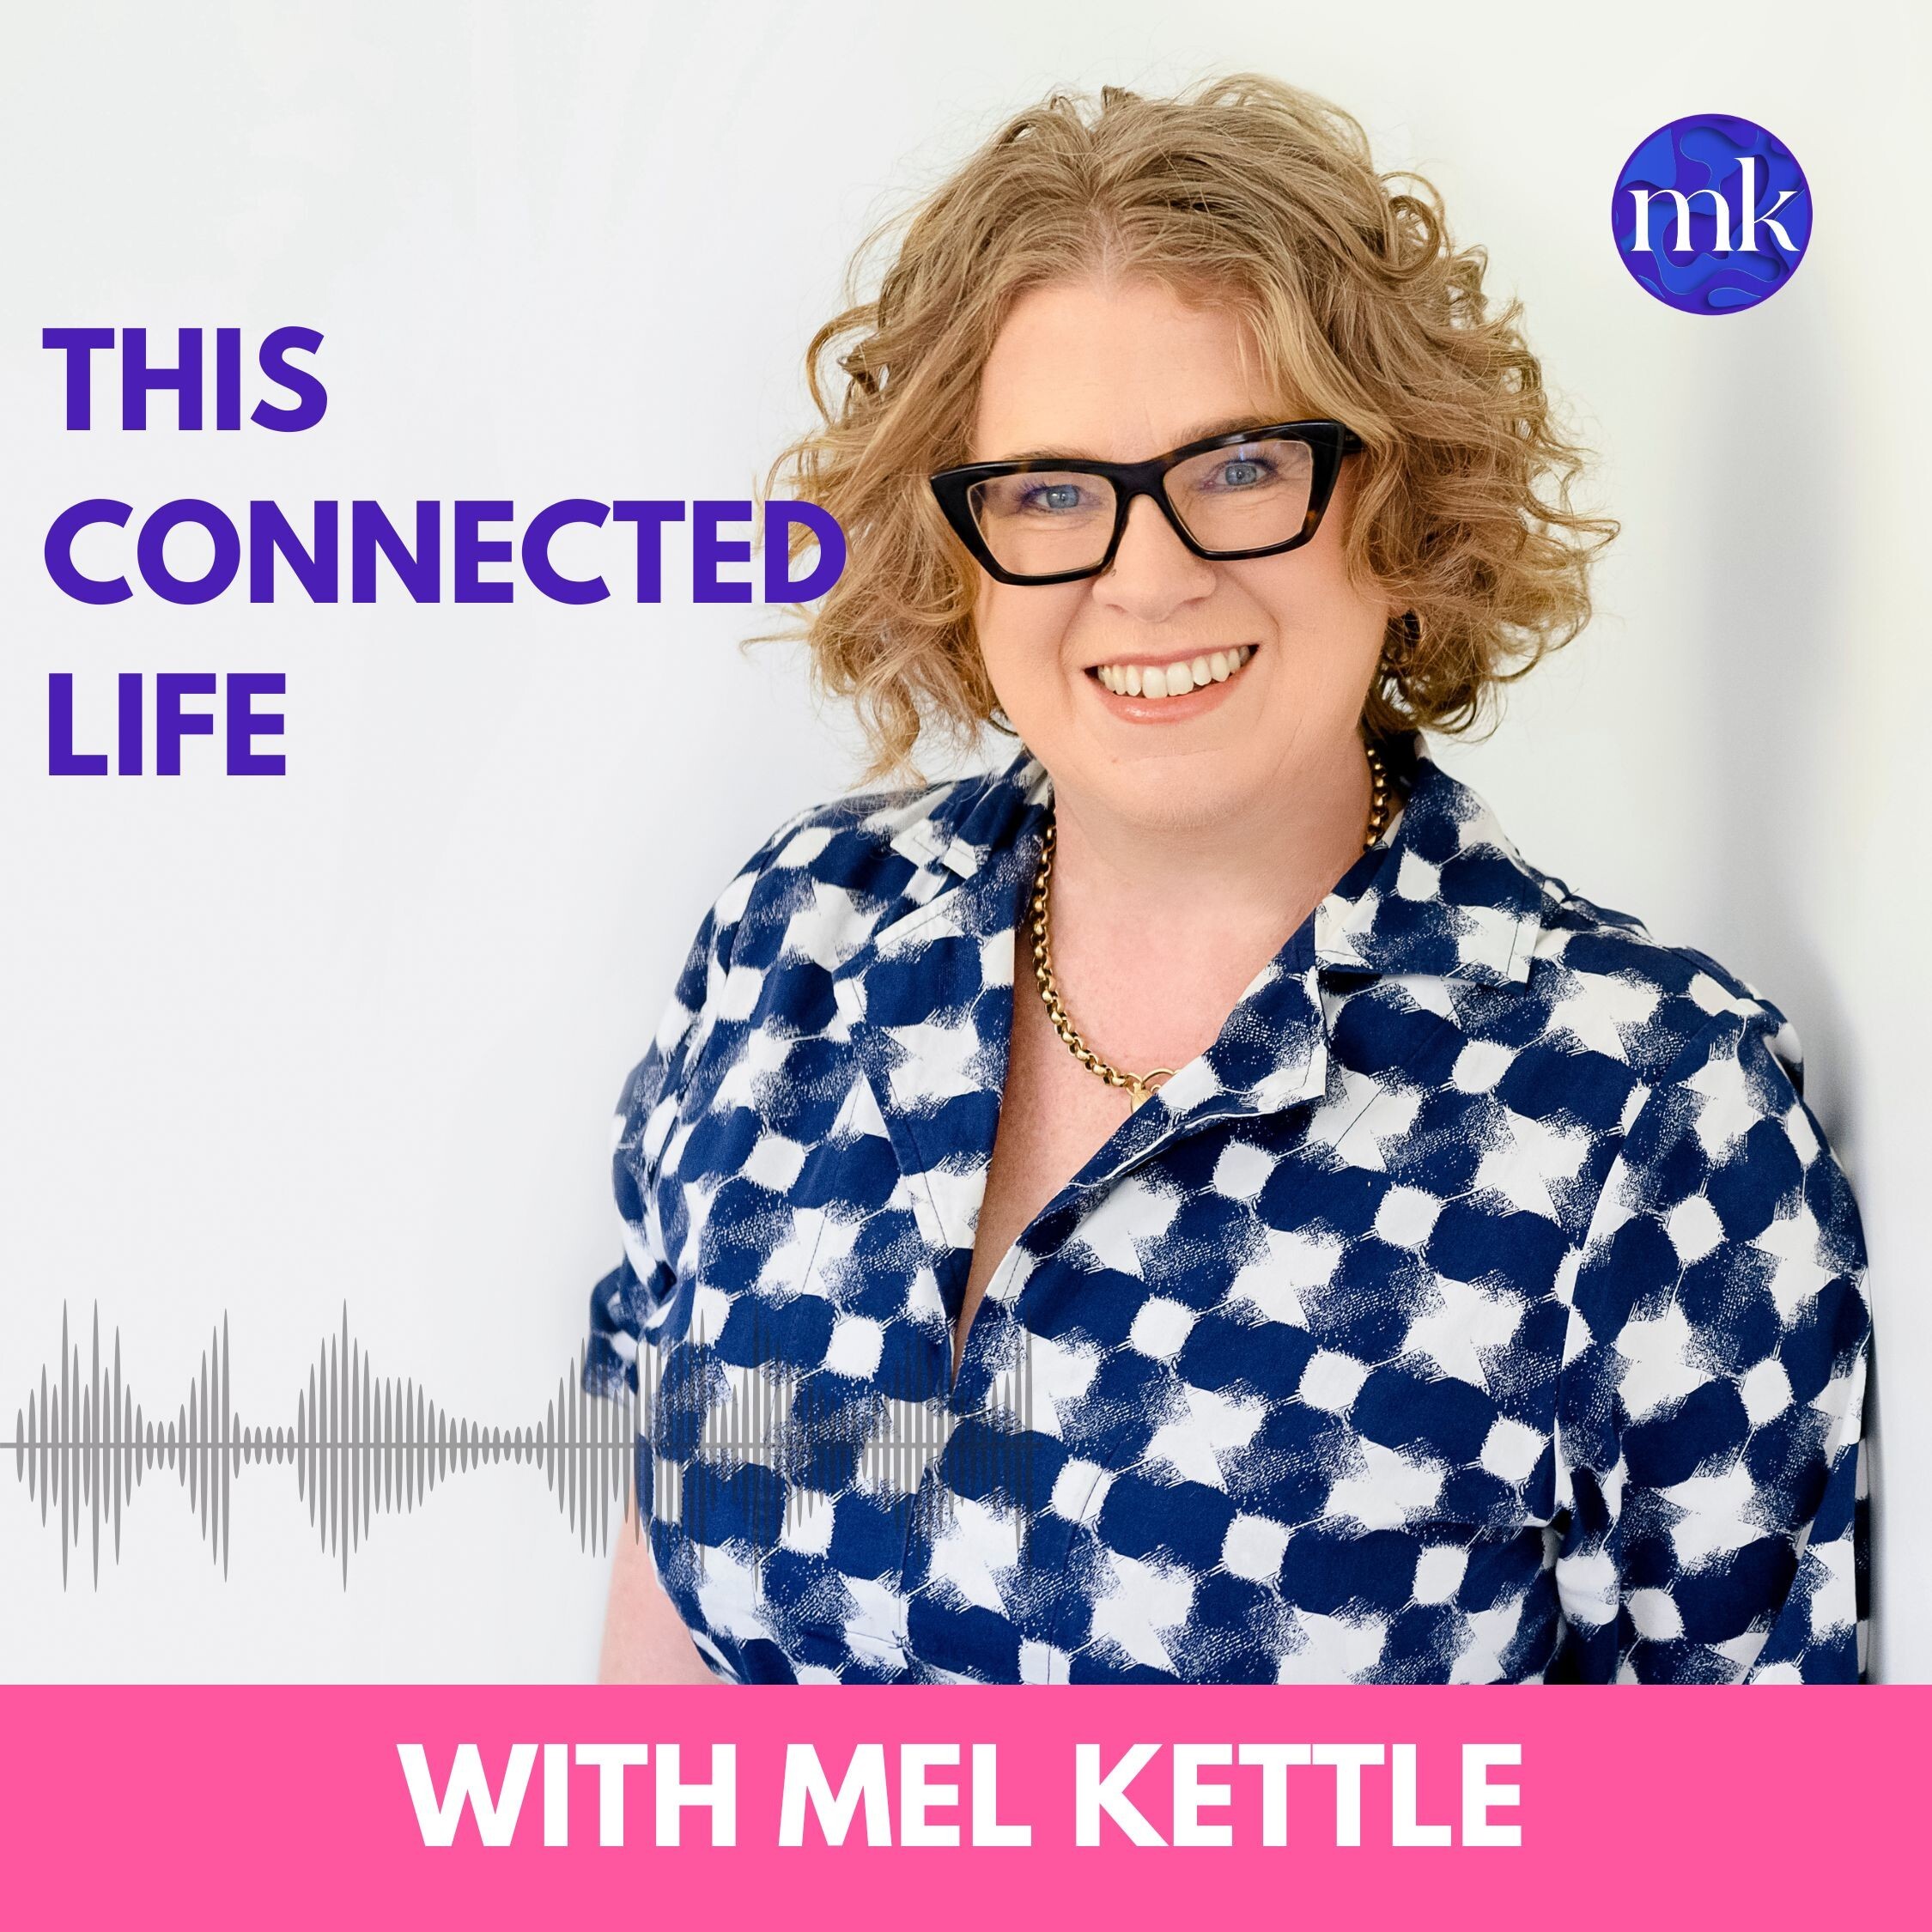 This Connected Life with Mel Kettle